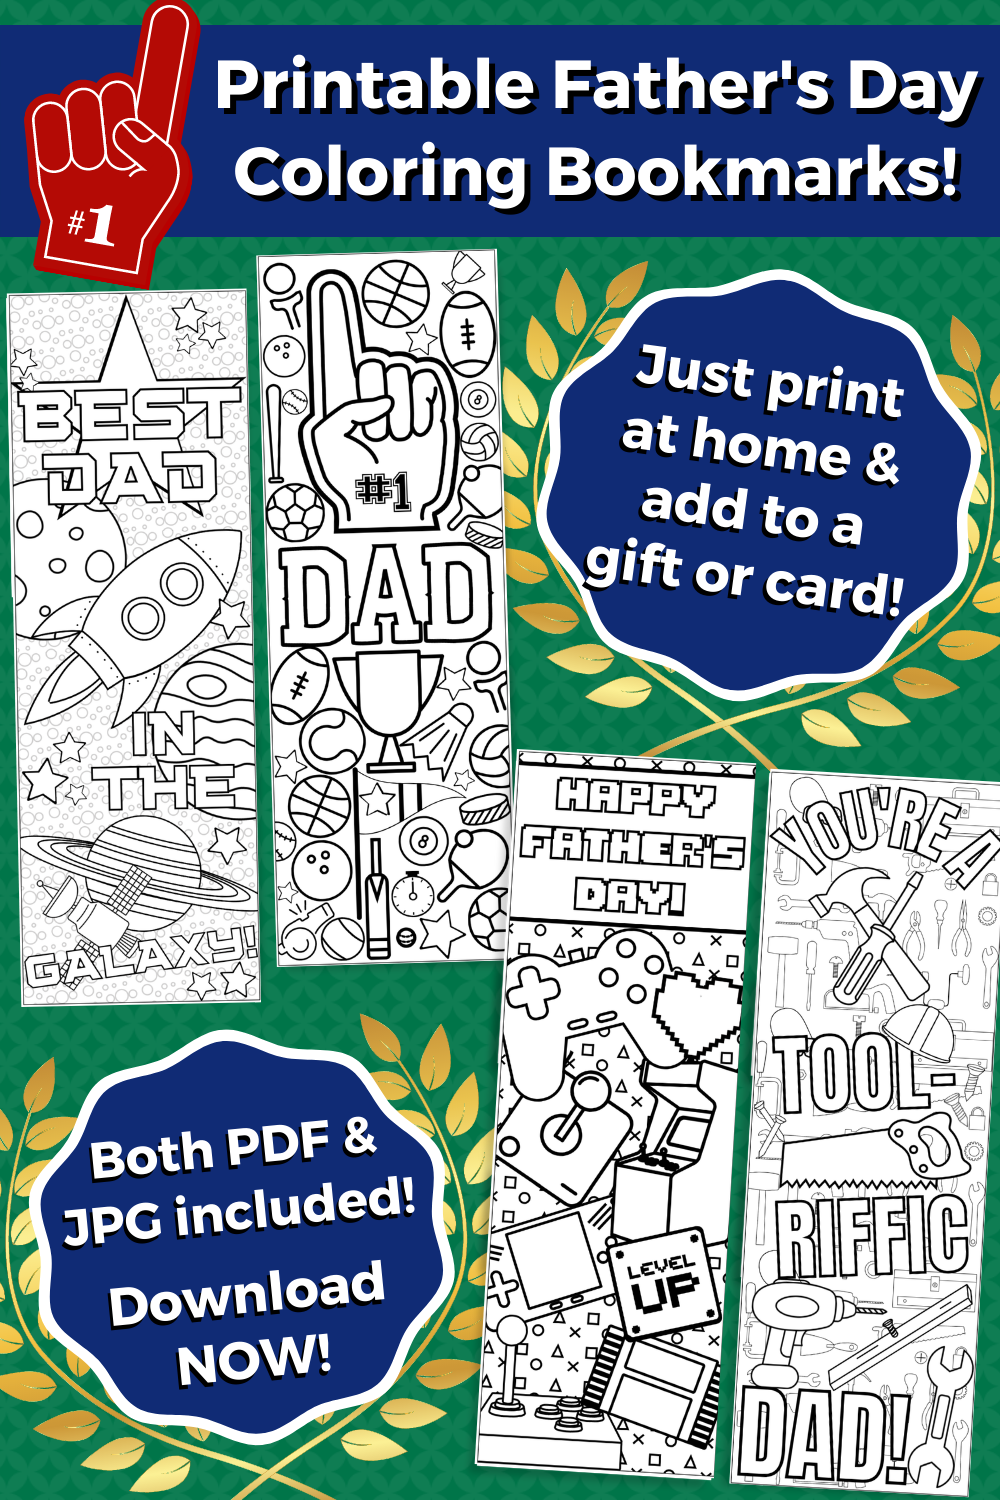 4 Printable Father's Day Coloring Bookmarks - For Instant Download